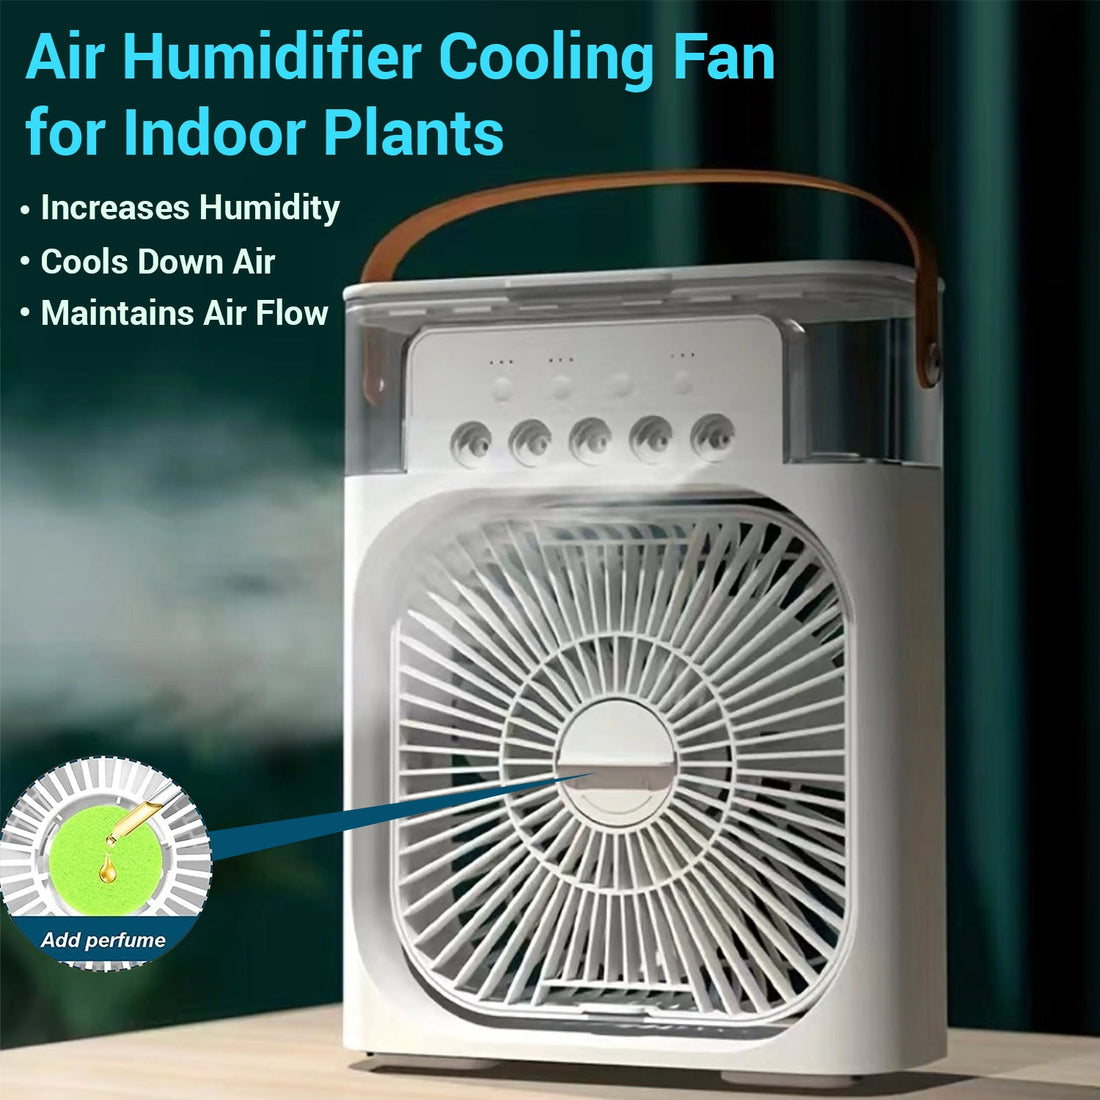 Plants Humidifier Fan - Protects from Heat and Helps plants thrive. - Perfect Plants